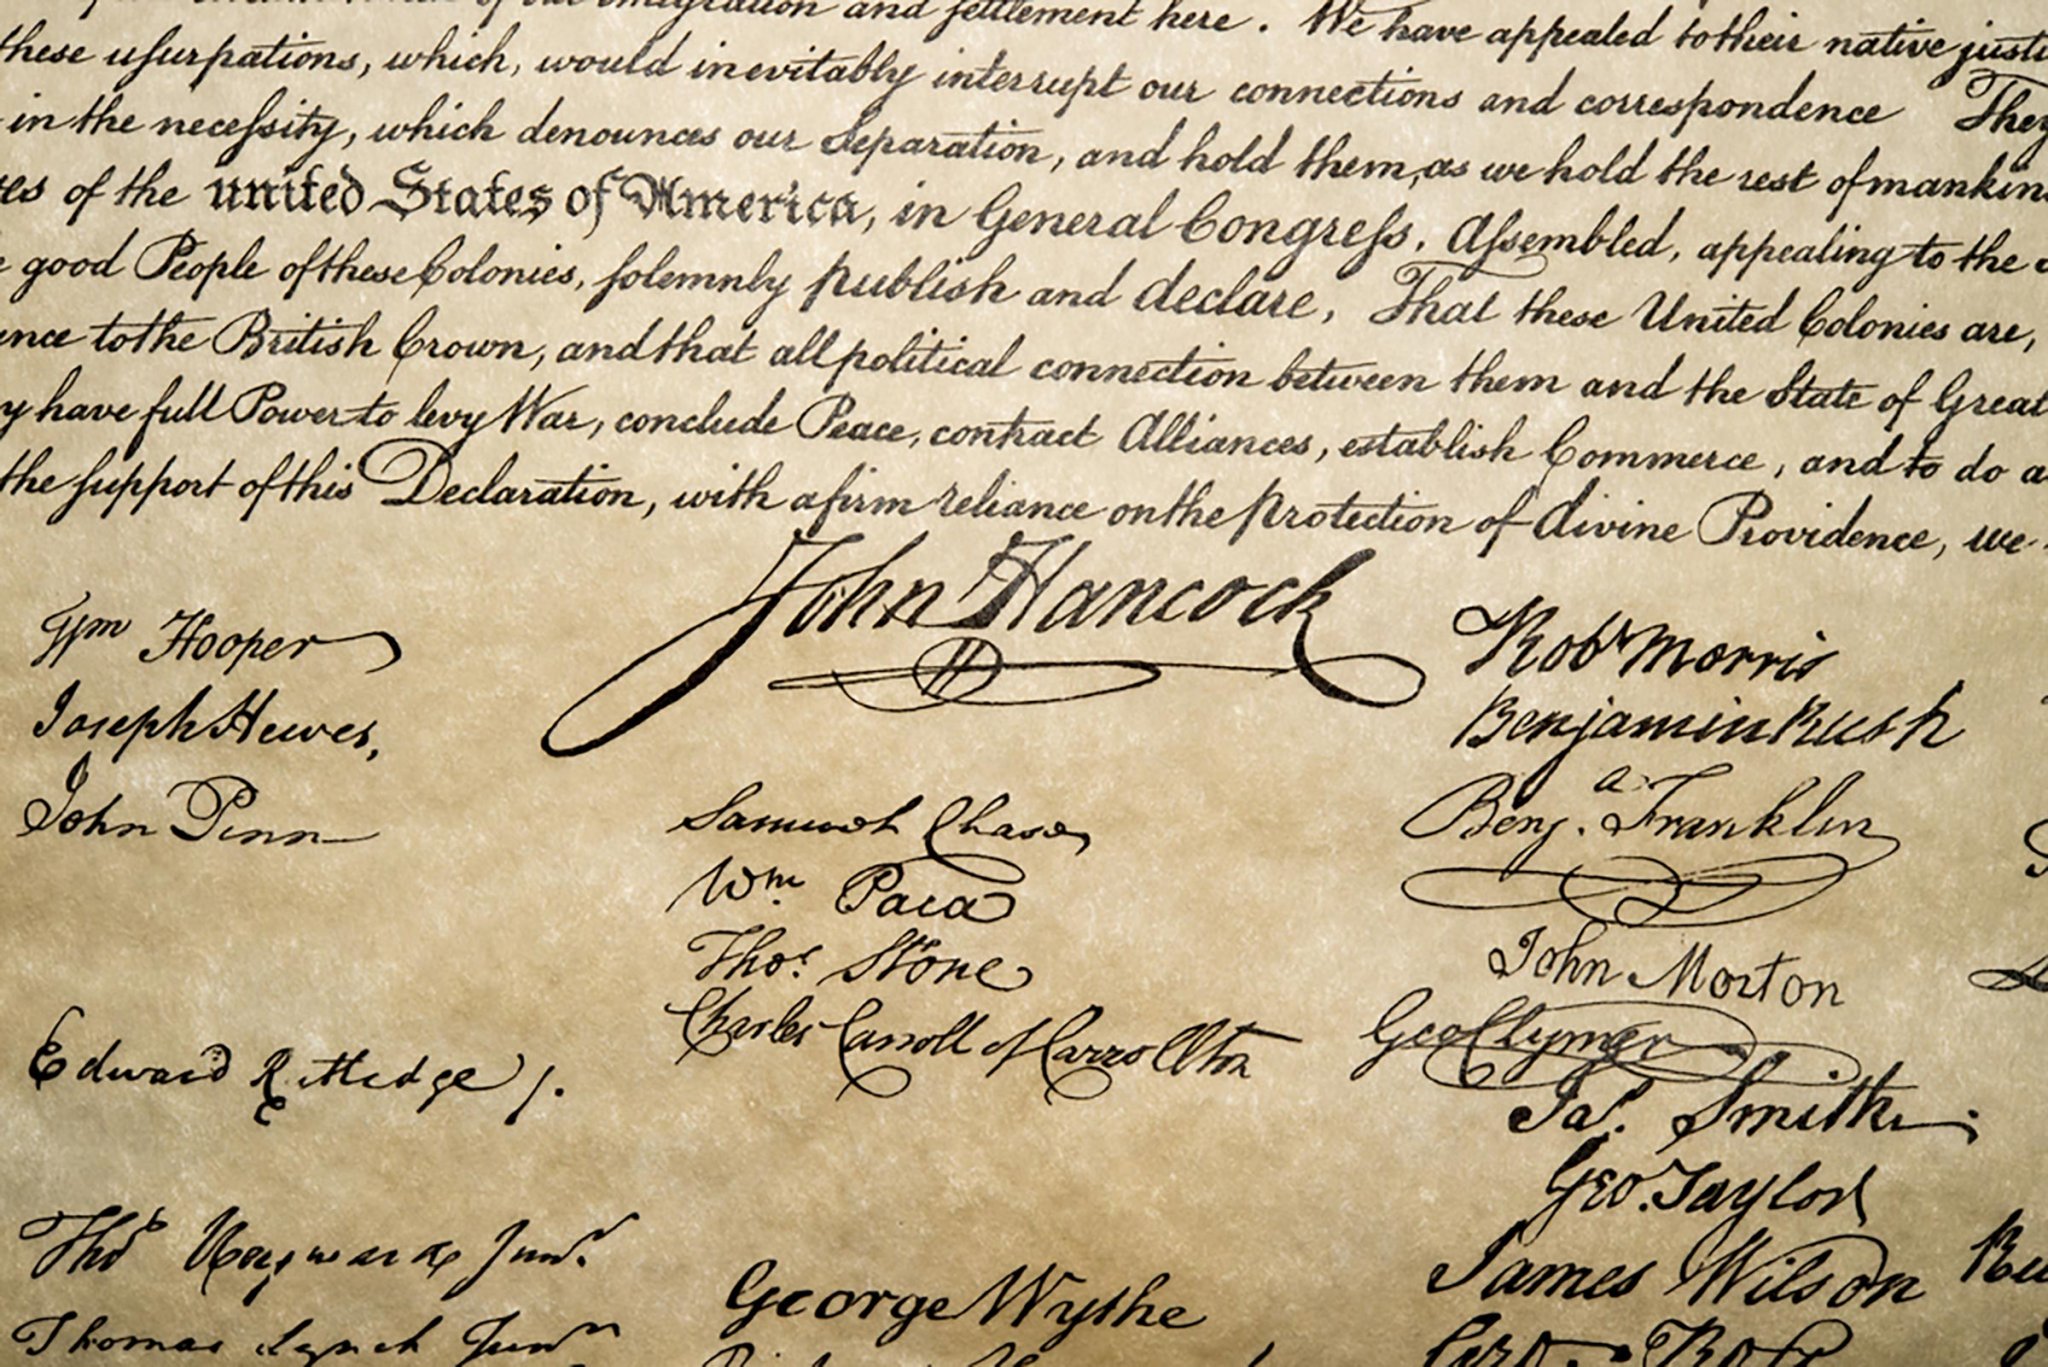 01_signatures_The-Most-Valuable-Signature-on-the-Declaration-of-Independence-Is-Not-Who-You-Th...jpg